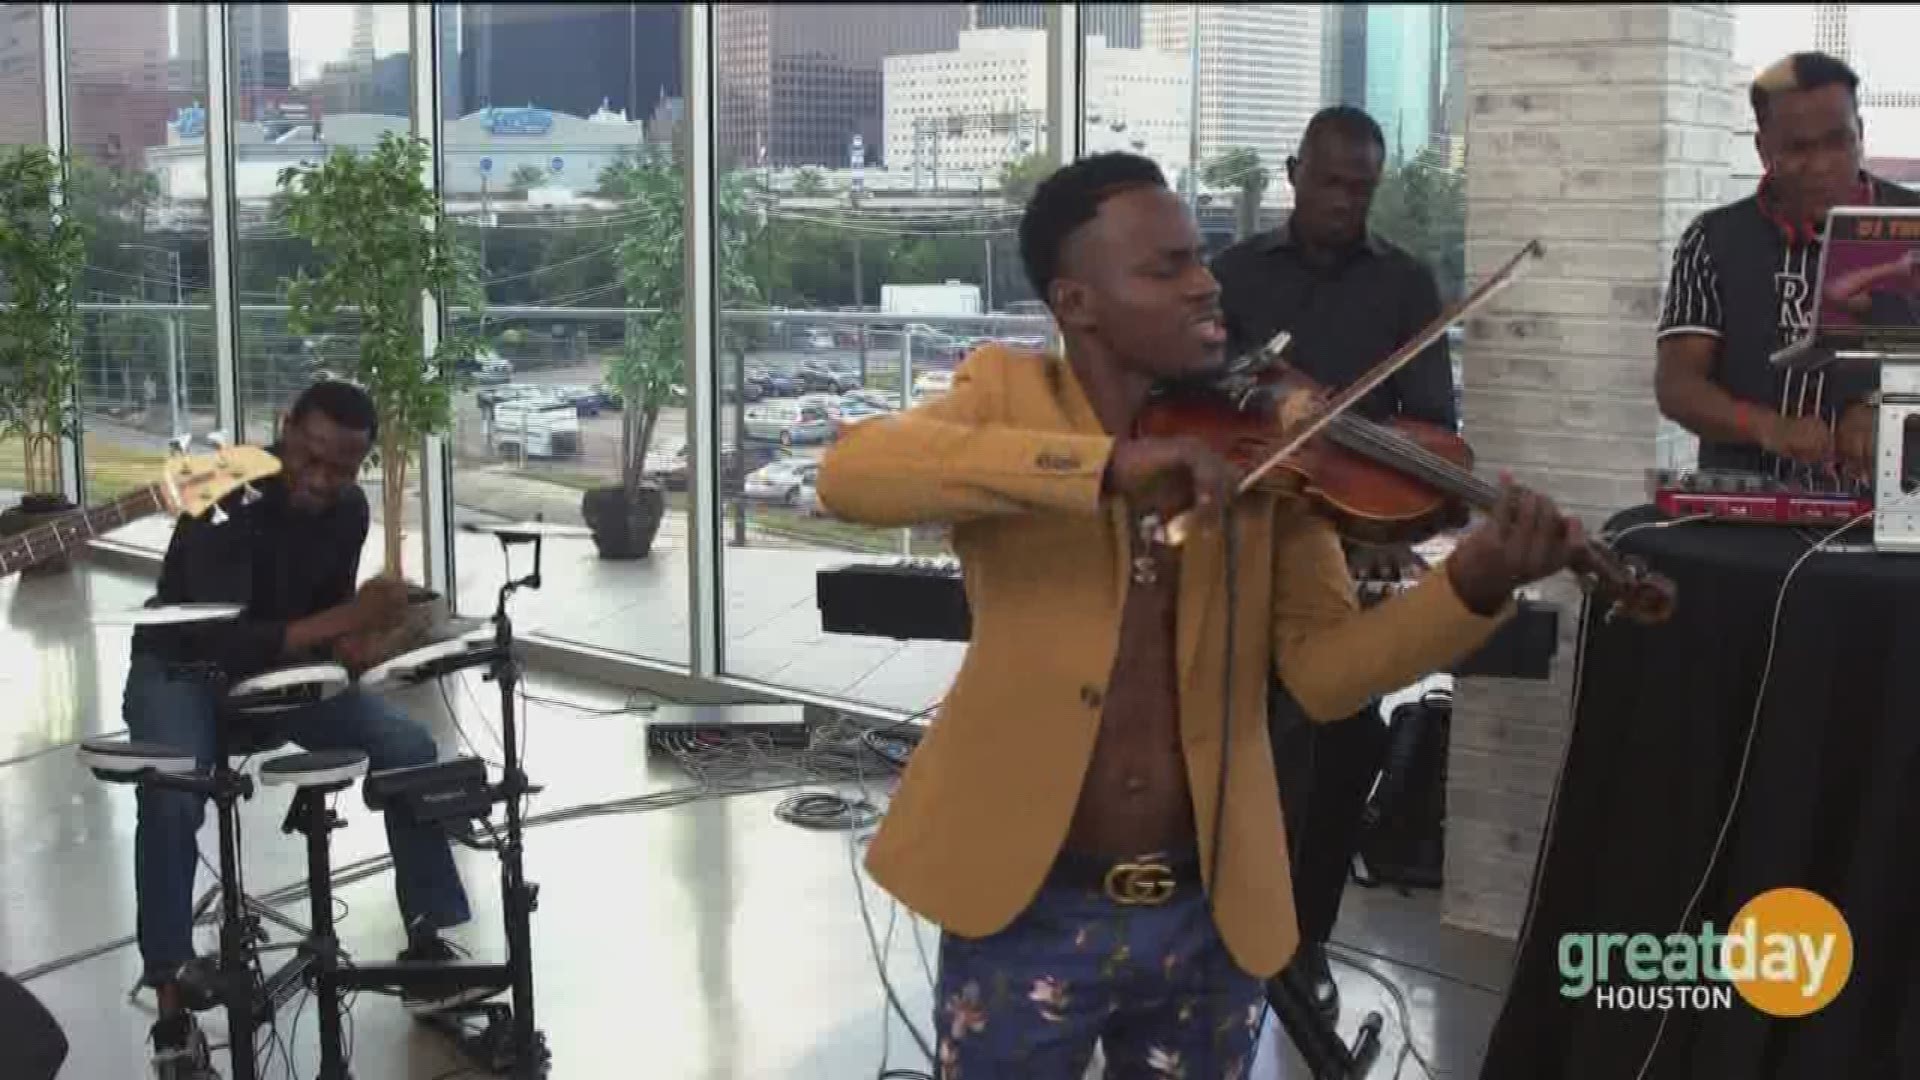 Afro-Pop artist Demola performs a mash up of current hit songs via his violin.

